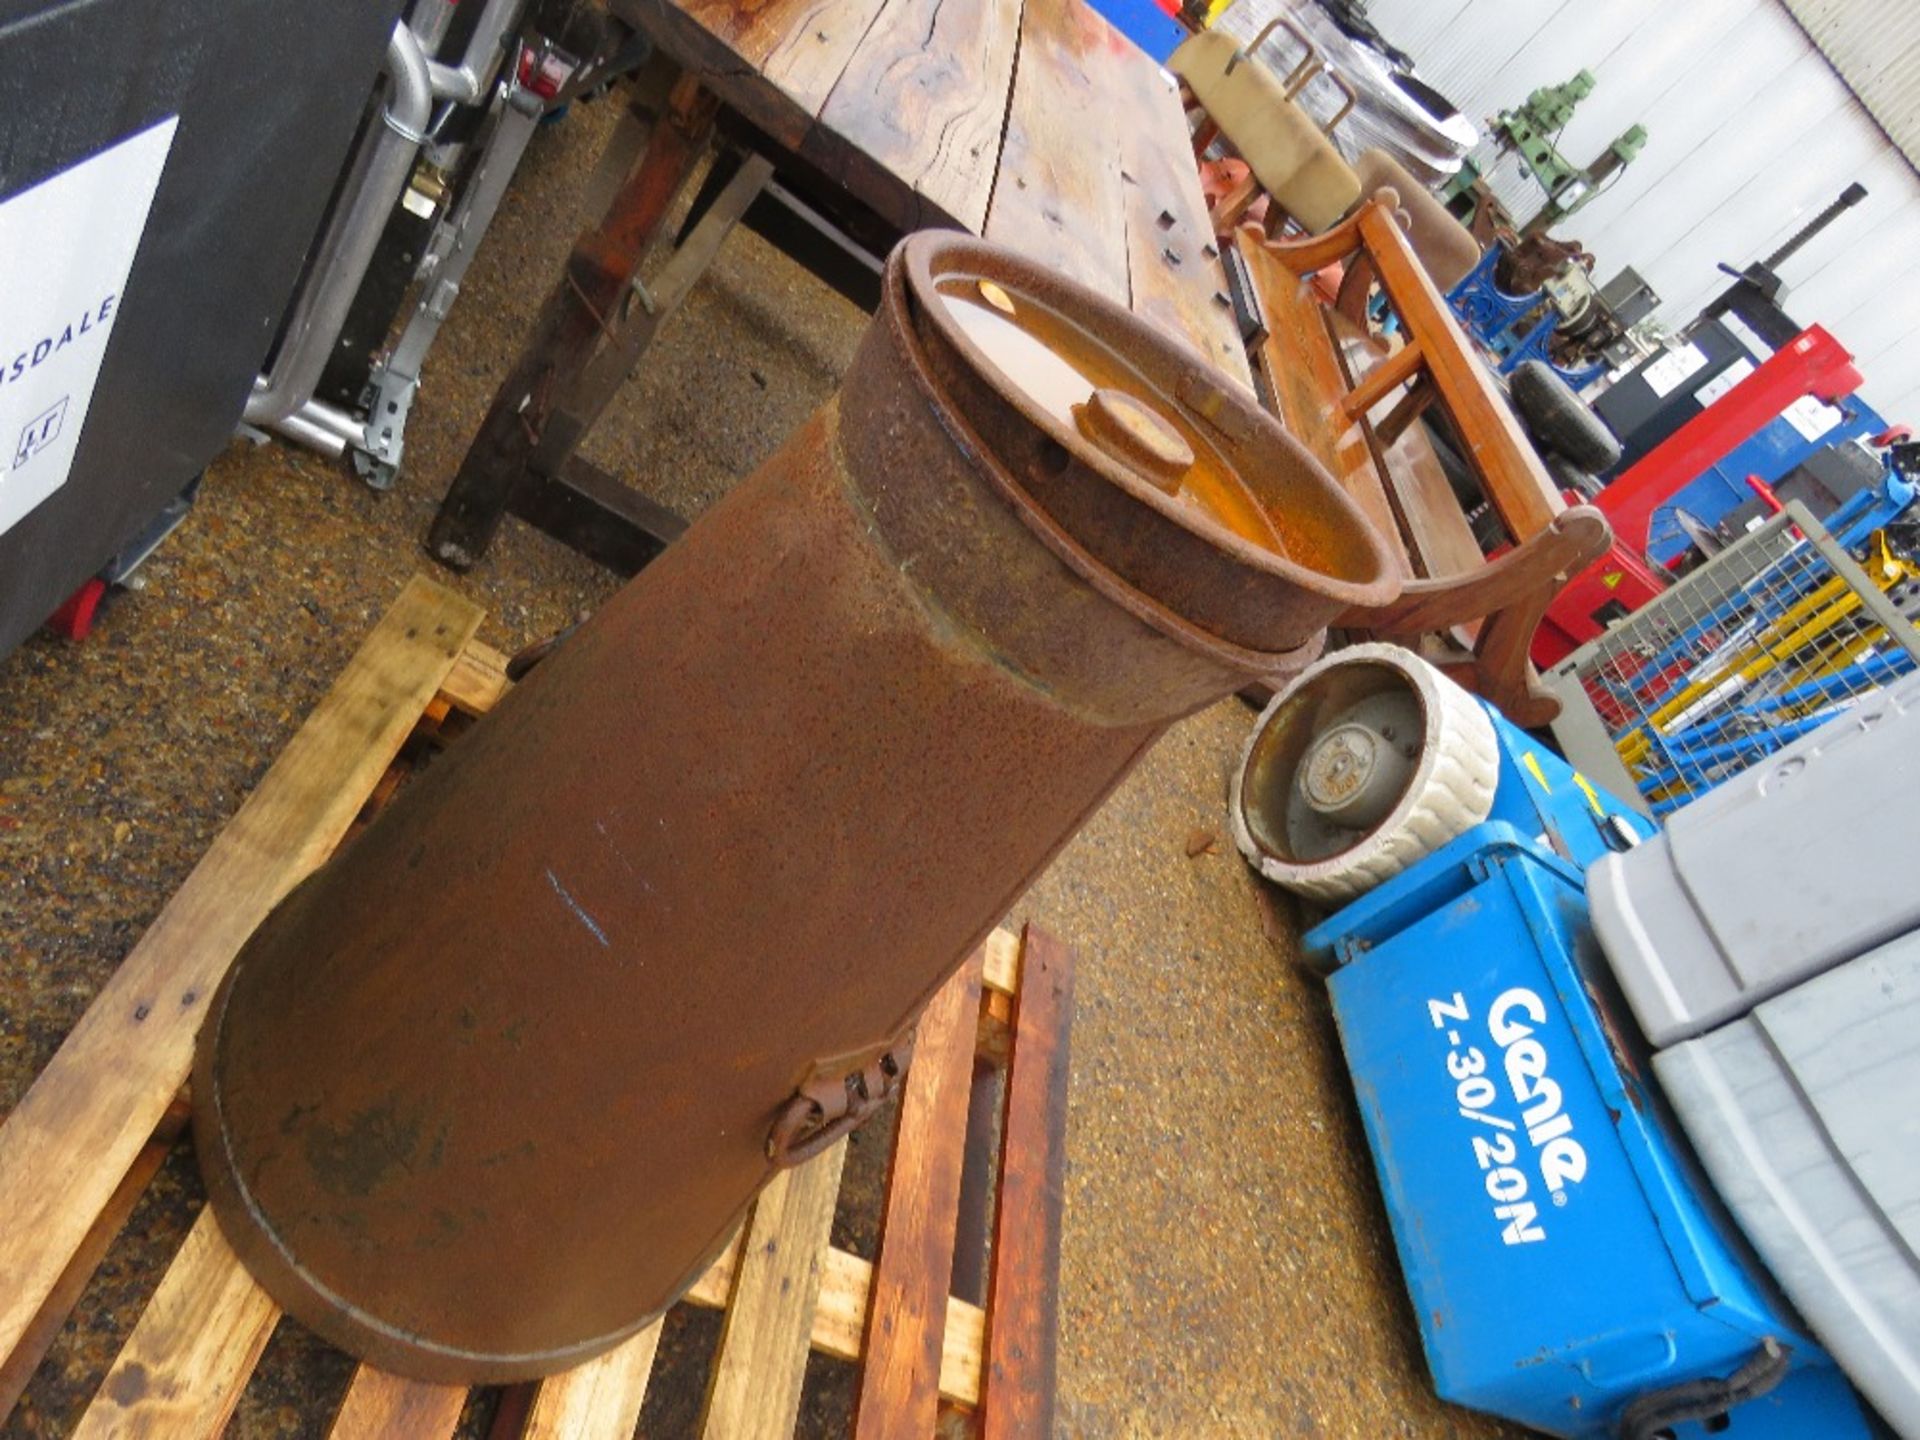 LARGE SIZED METAL CHURN / PLANTER WITH LID. - Image 2 of 5